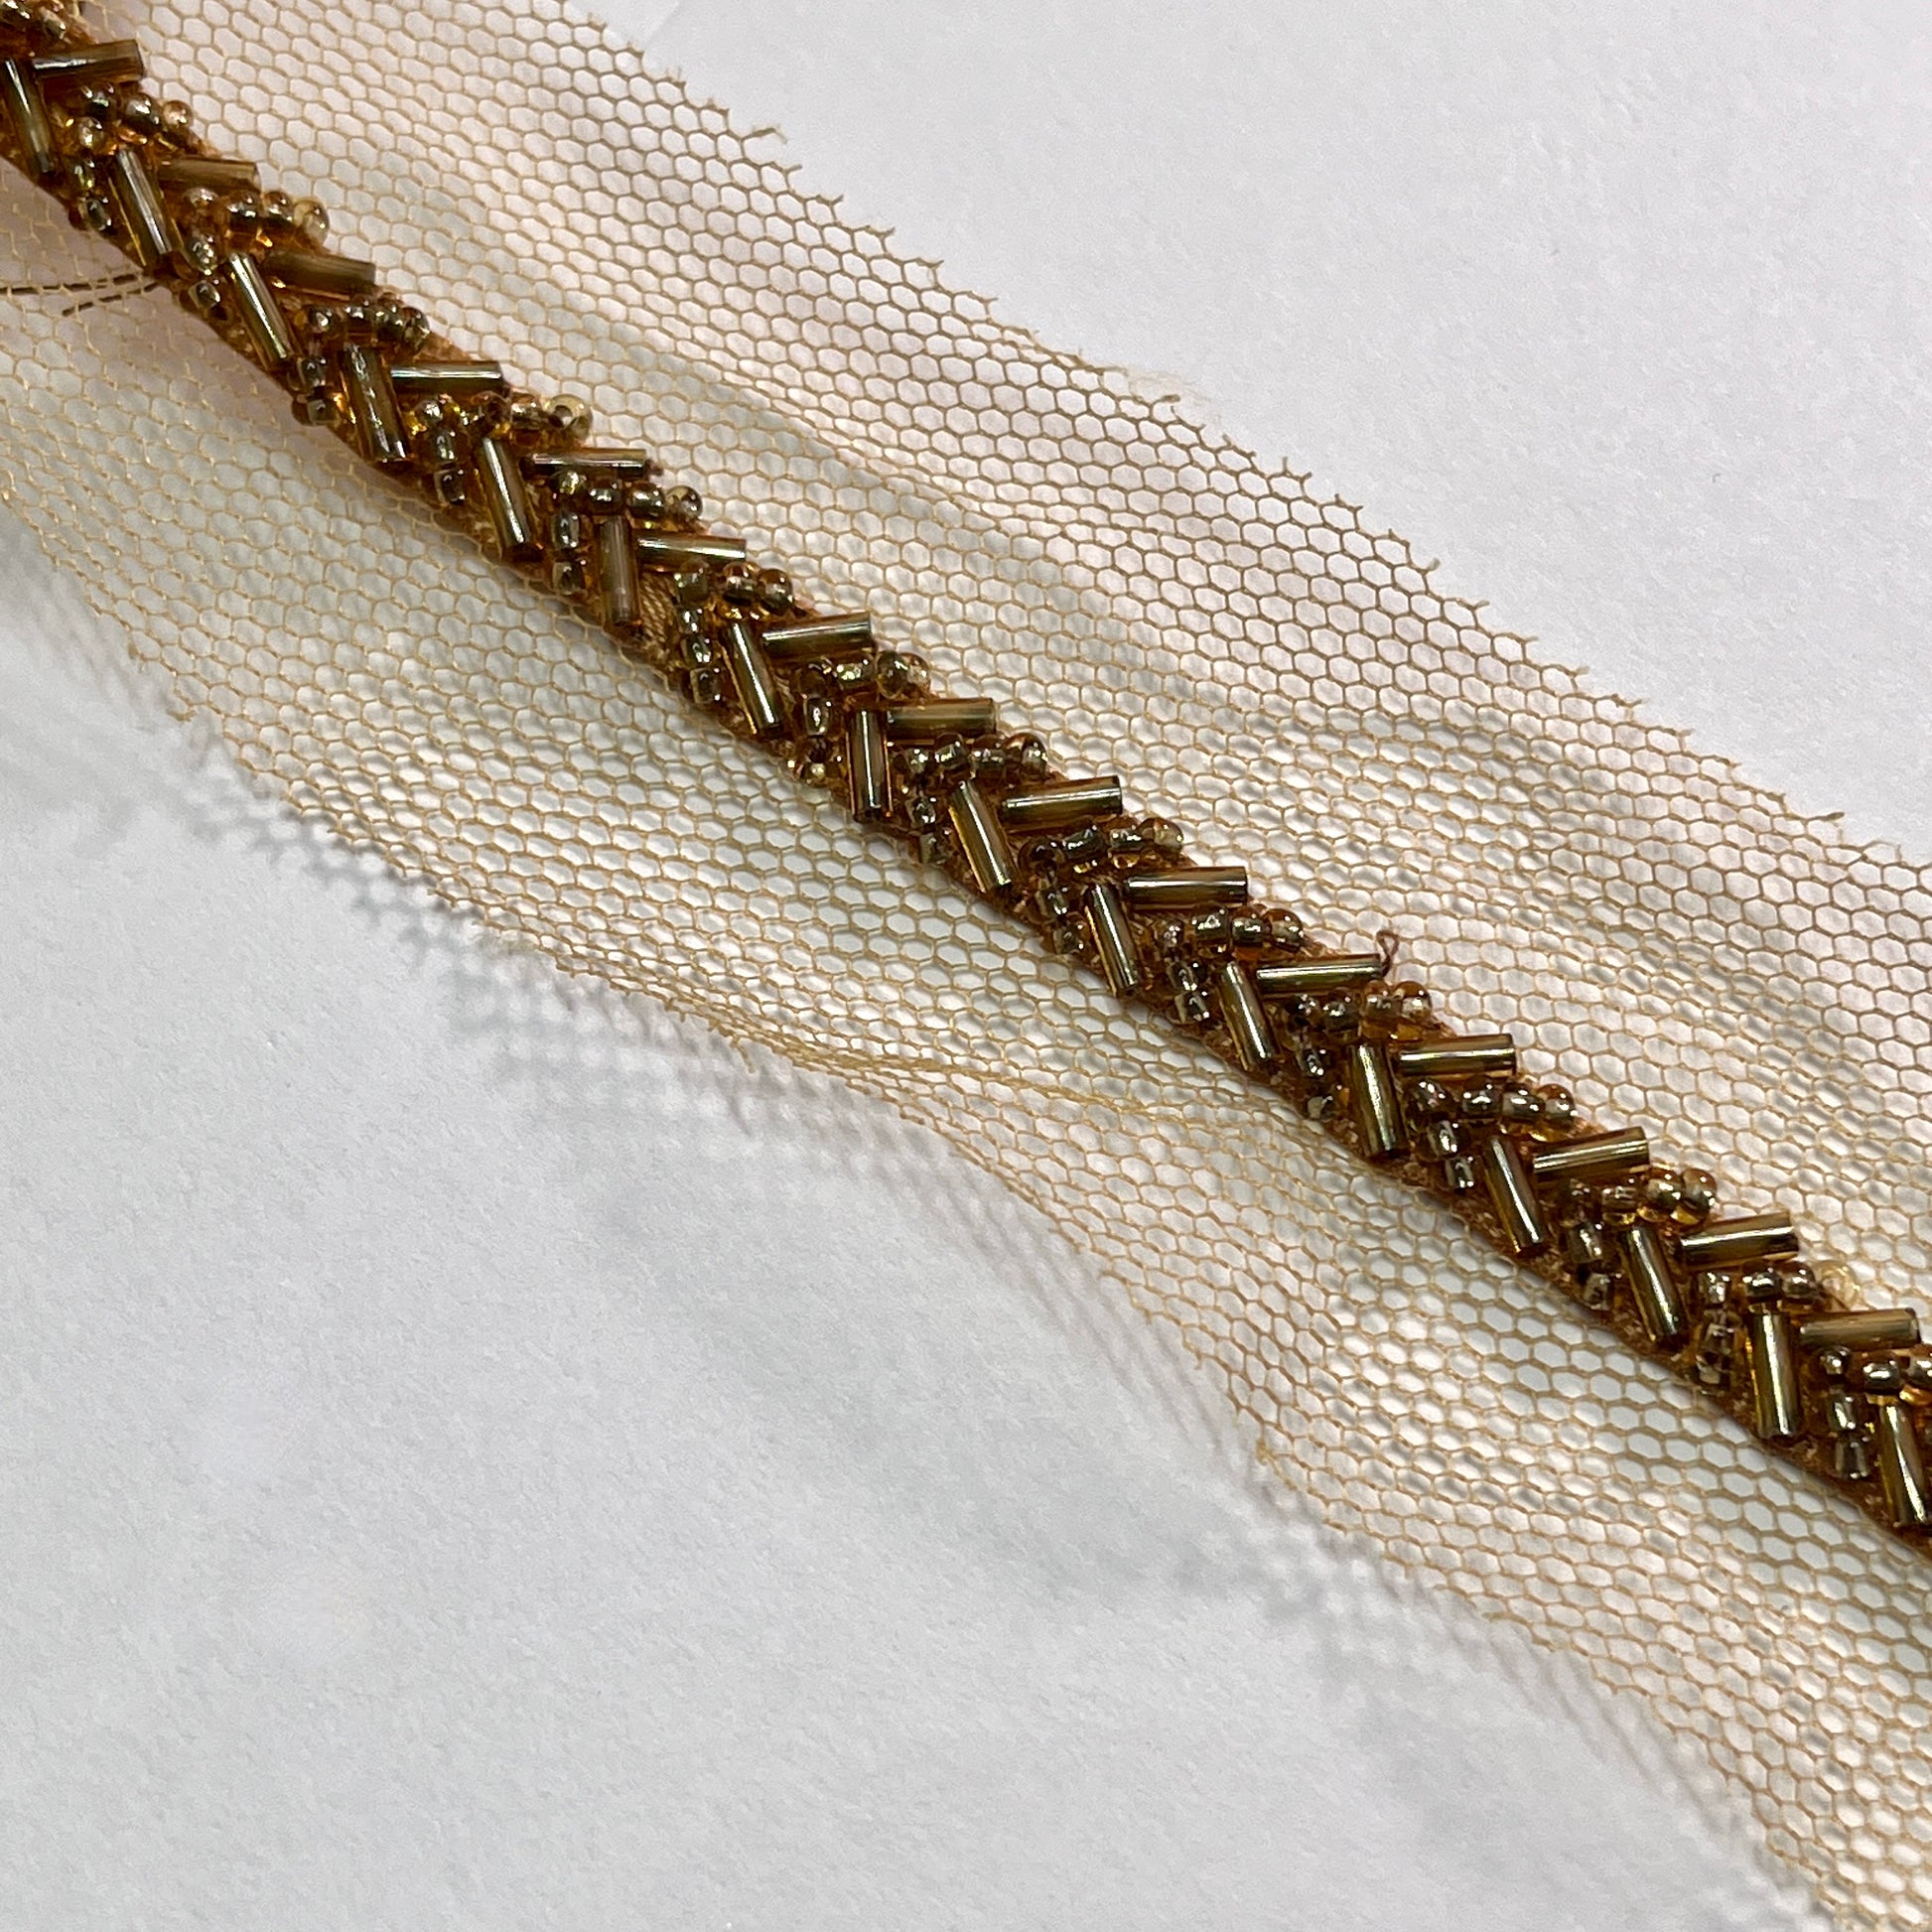 Beautiful bugle bead trim, hand beaded on a tulle netting. Popular for bridal wear, evening wear, crafts, jewellery and headband making.